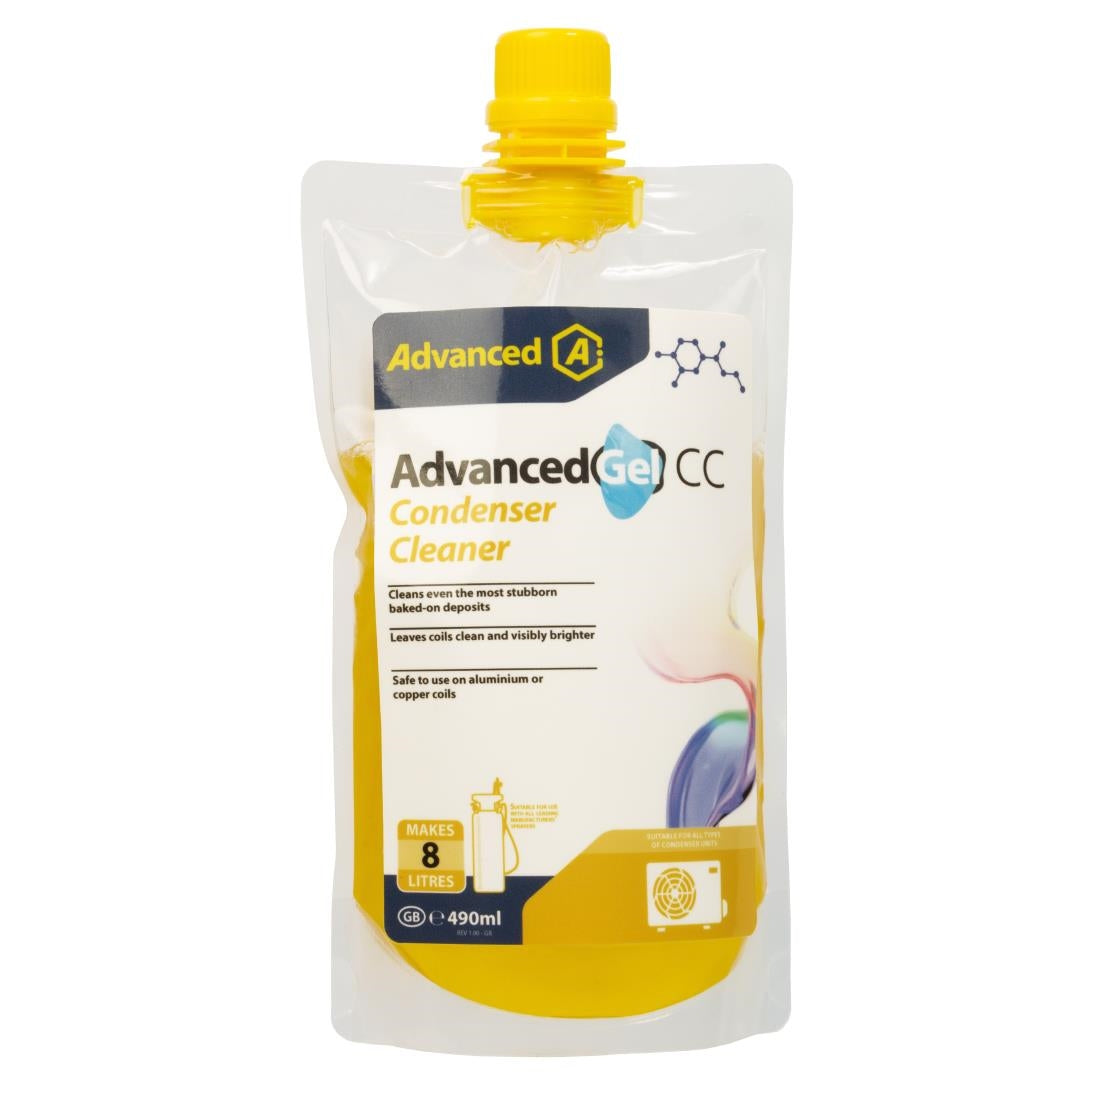 CH149 Advanced Gel CC Condenser Cleaner Concentrate 490ml JD Catering Equipment Solutions Ltd